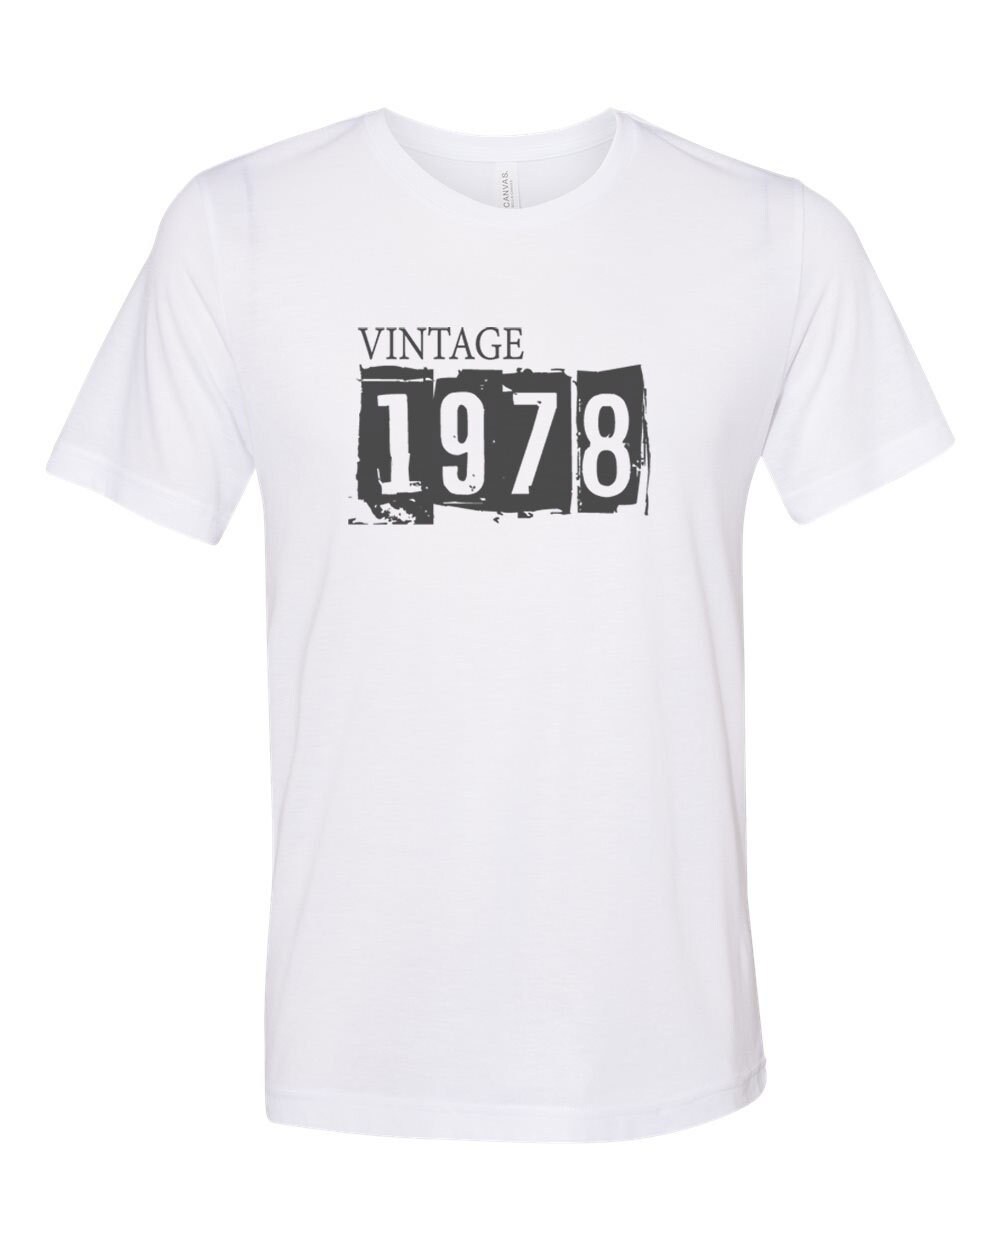 Discover Vintage 1978, 1978 Shirt, Unisex, Born In 1978, Soft Bella Canvas, Sublimation, 1978, 1978 Tee, Gift For Her, Birthday Gift